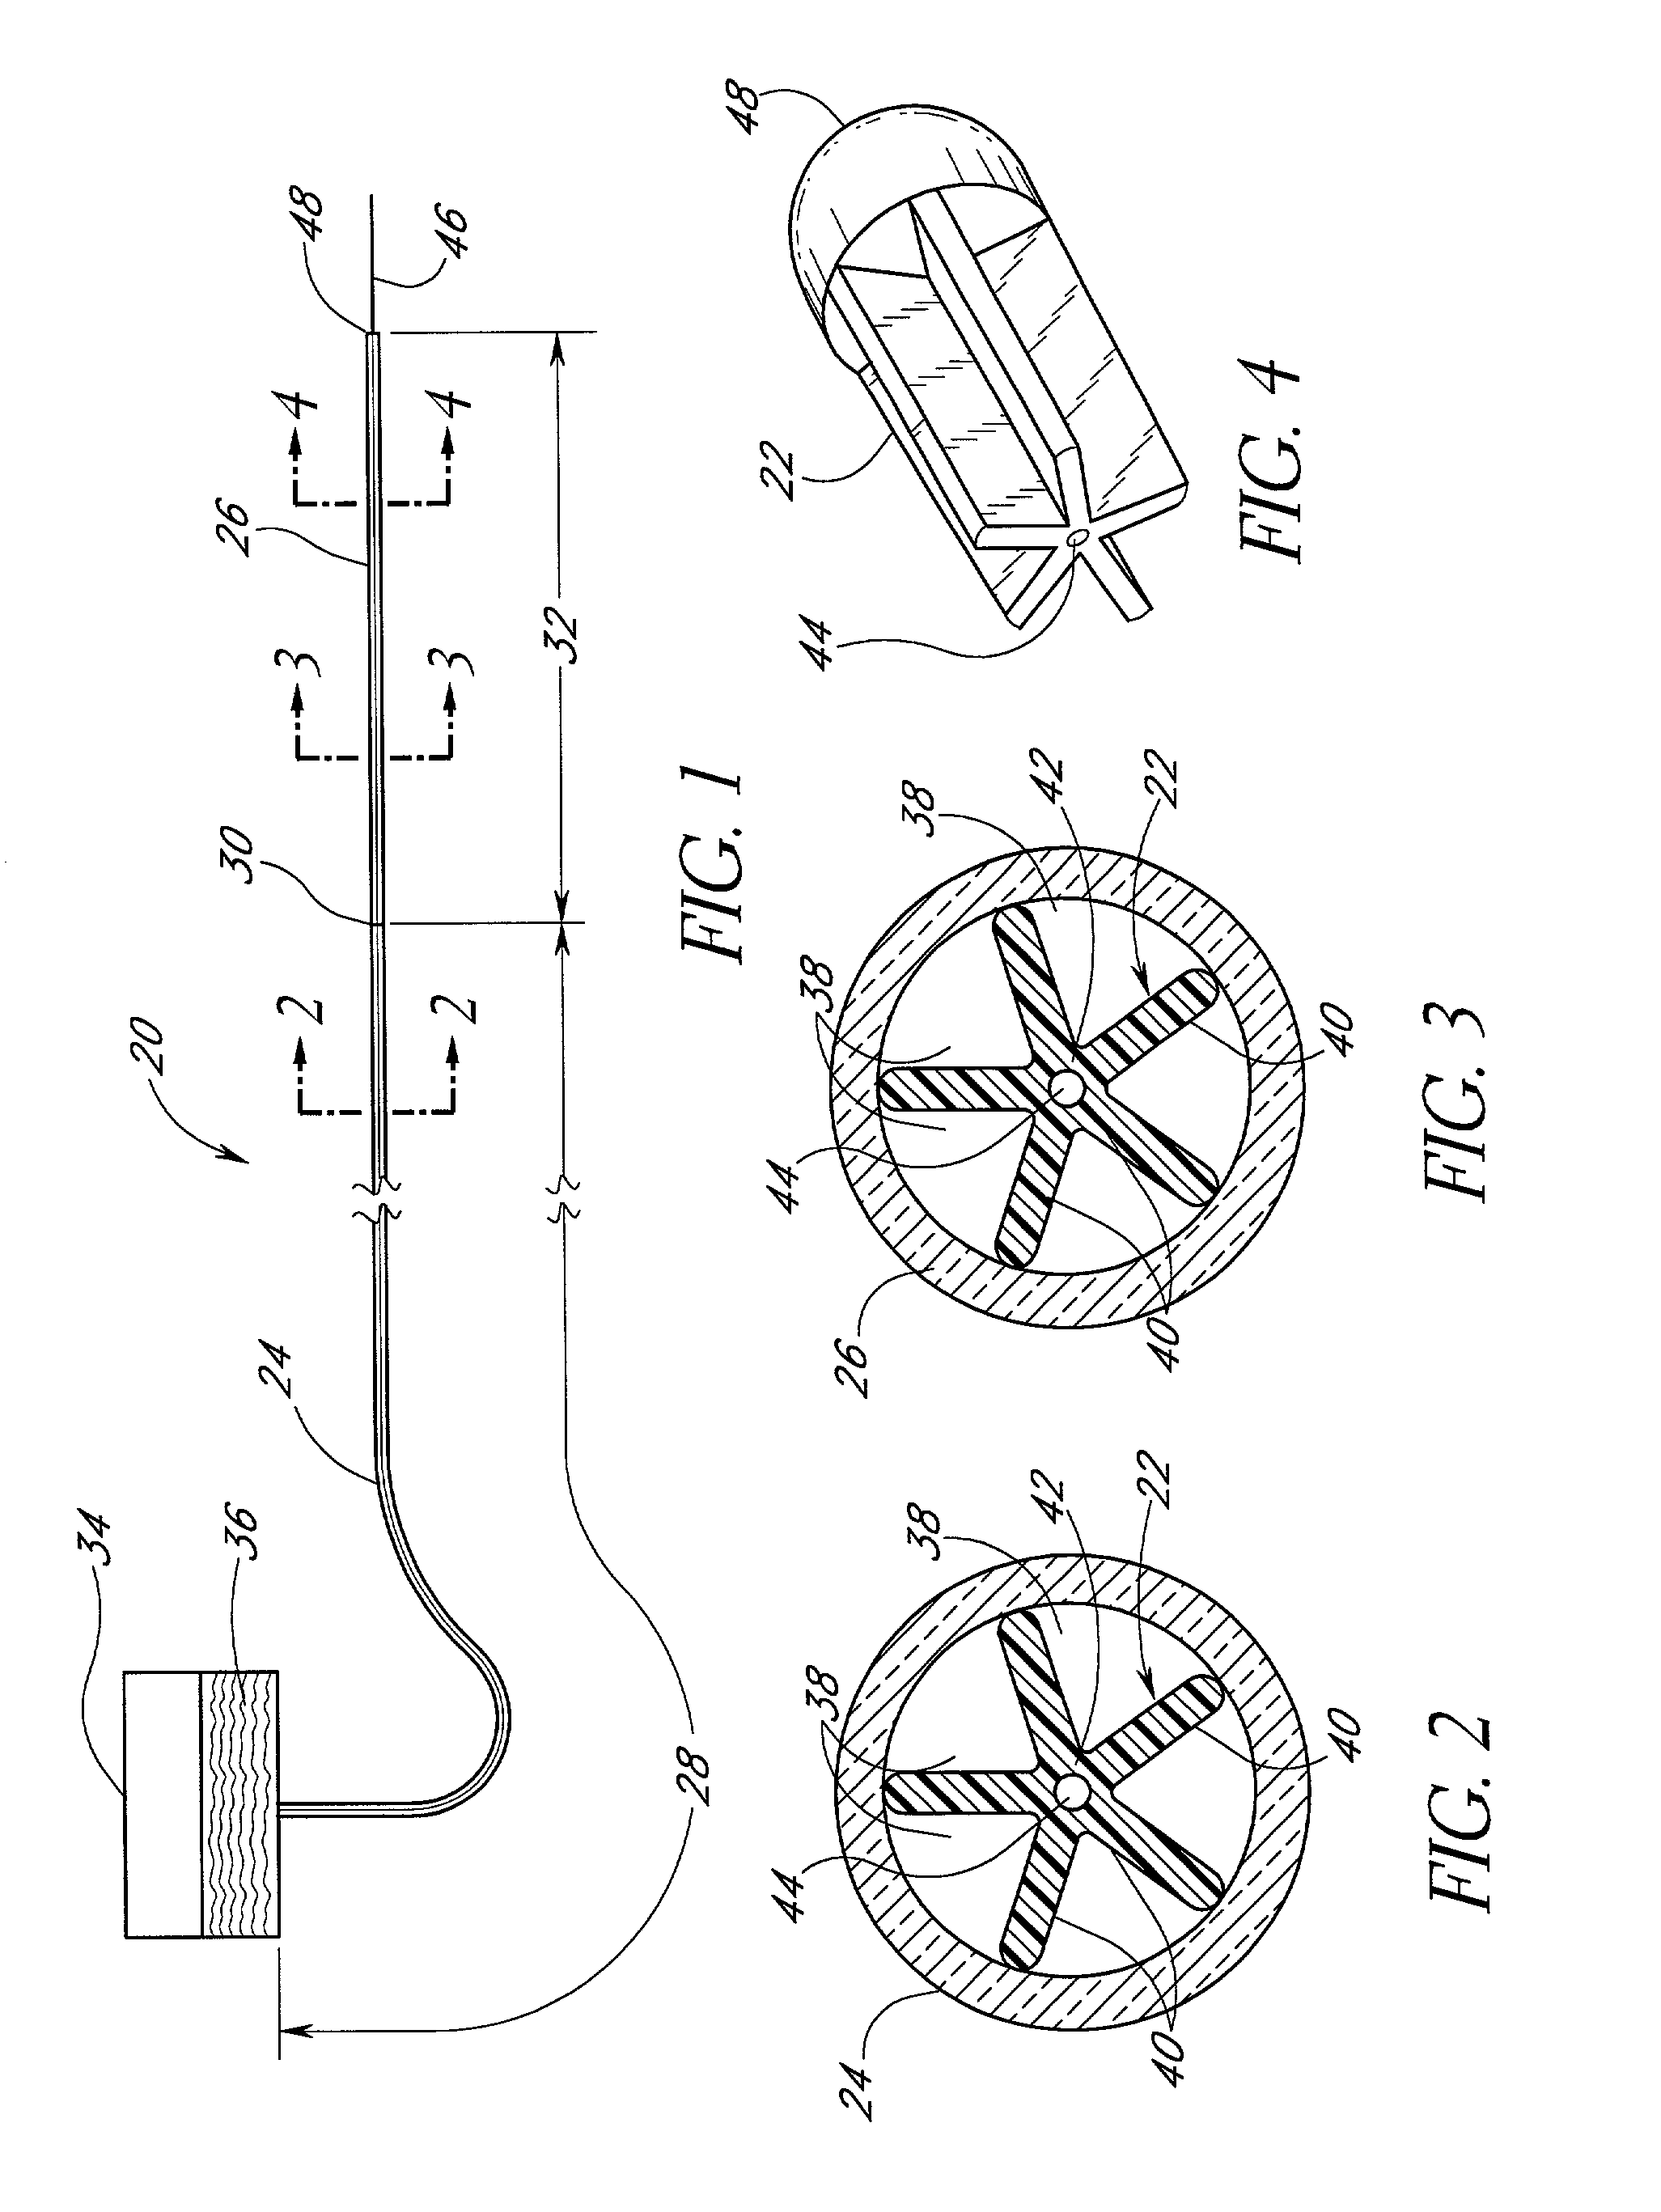 Catheter for uniform delivery of medication